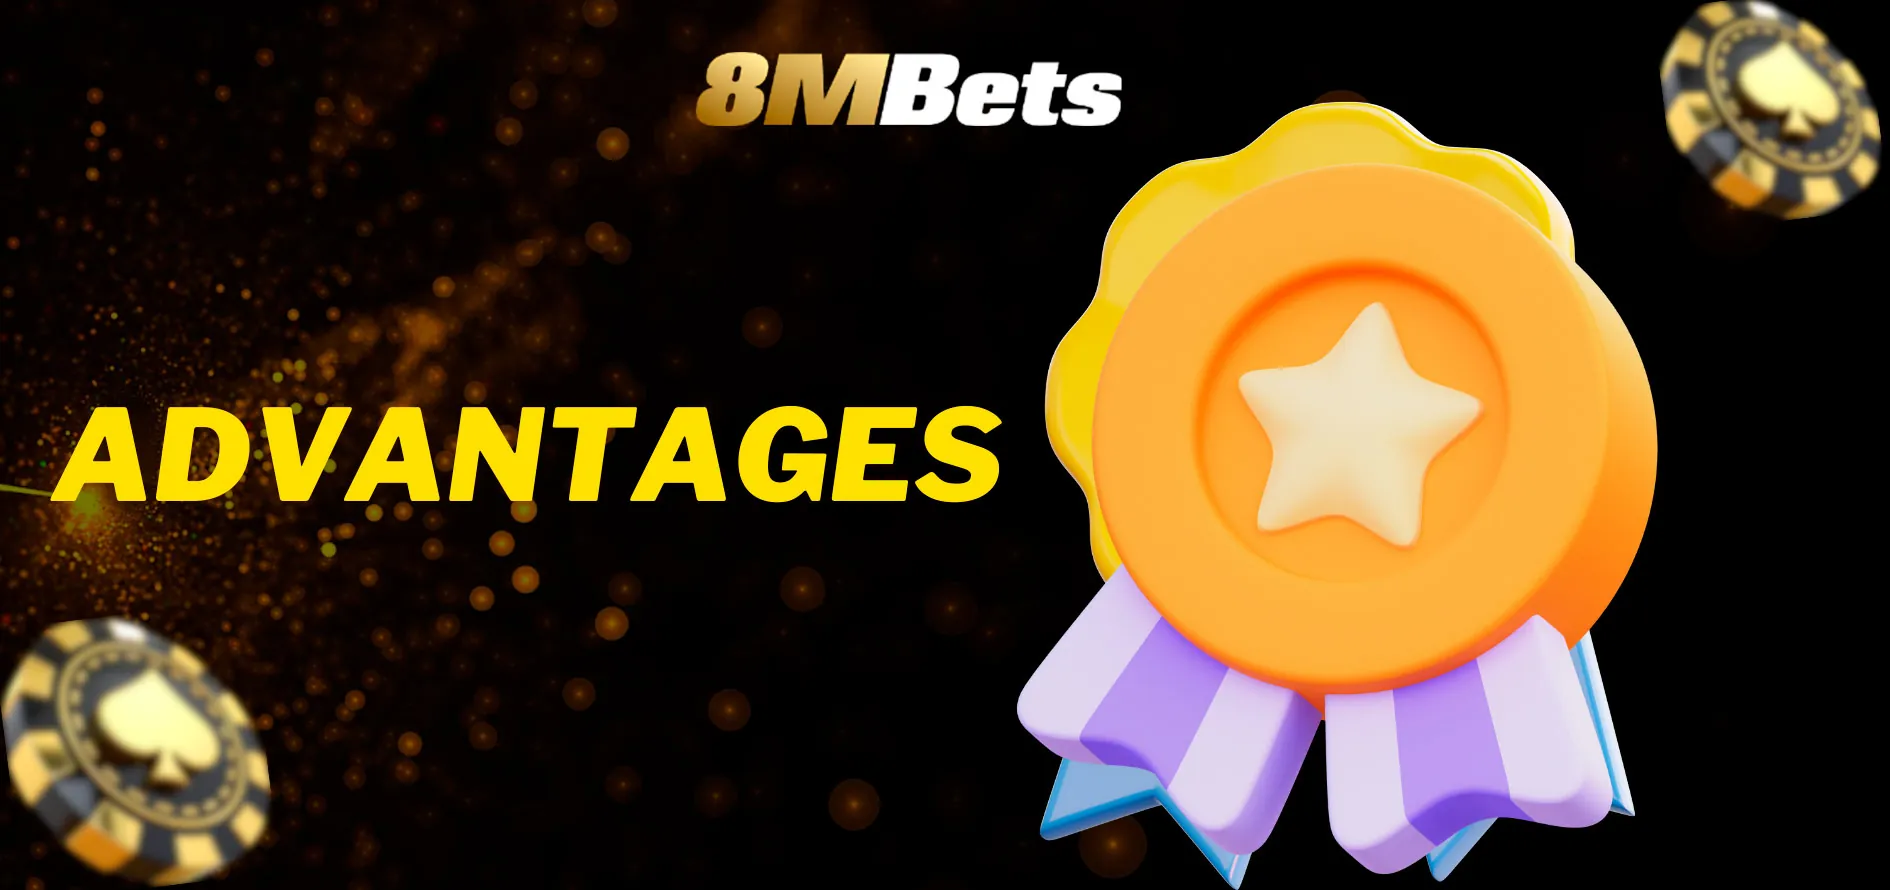 Discover the 8mbets Advantage: Bangladesh's Top Online Betting Platform